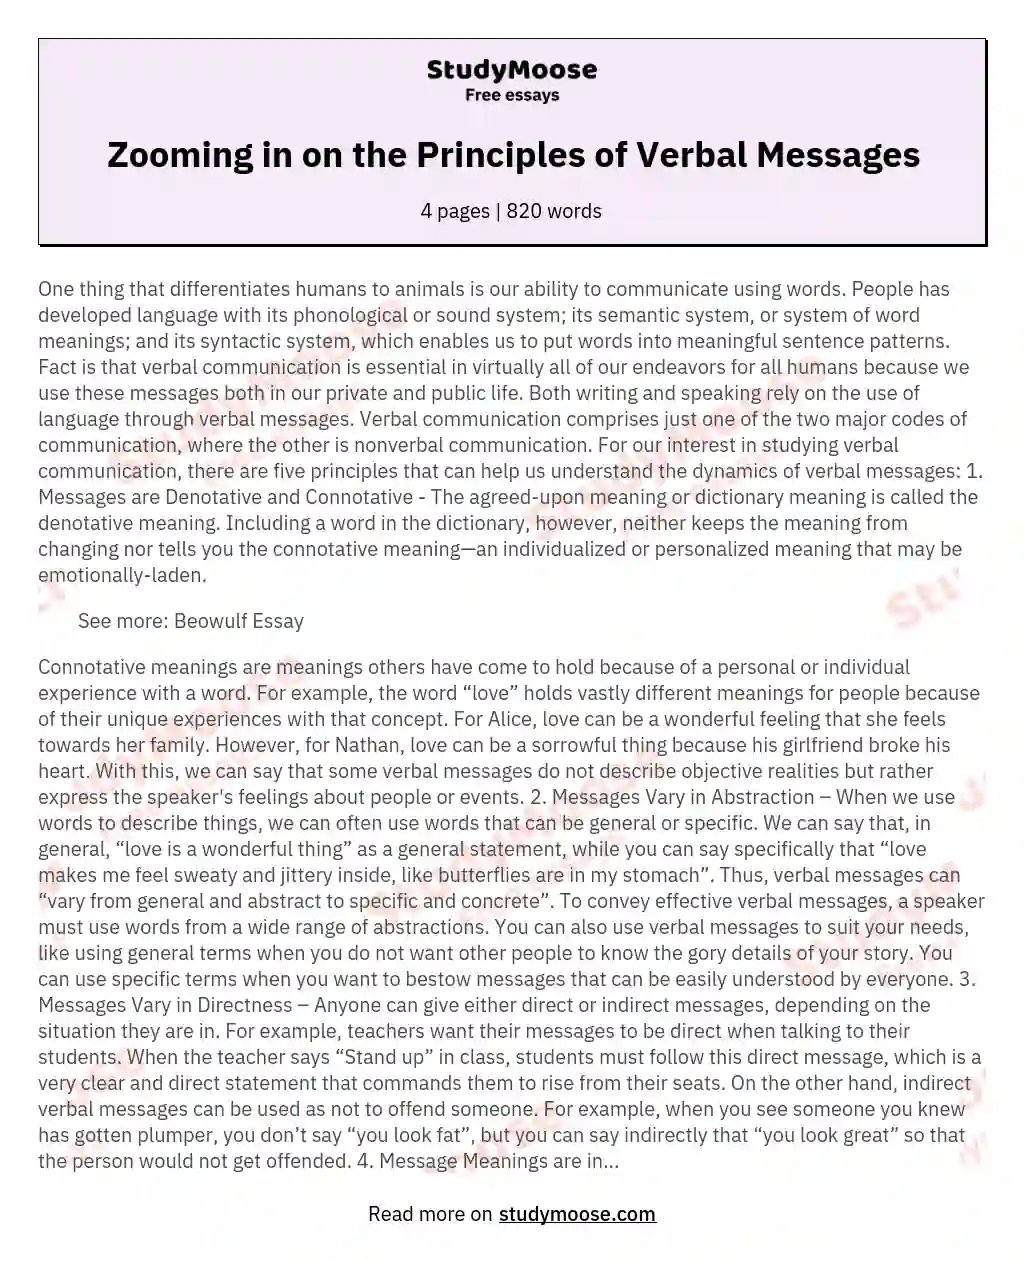 Zooming in on the Principles of Verbal Messages